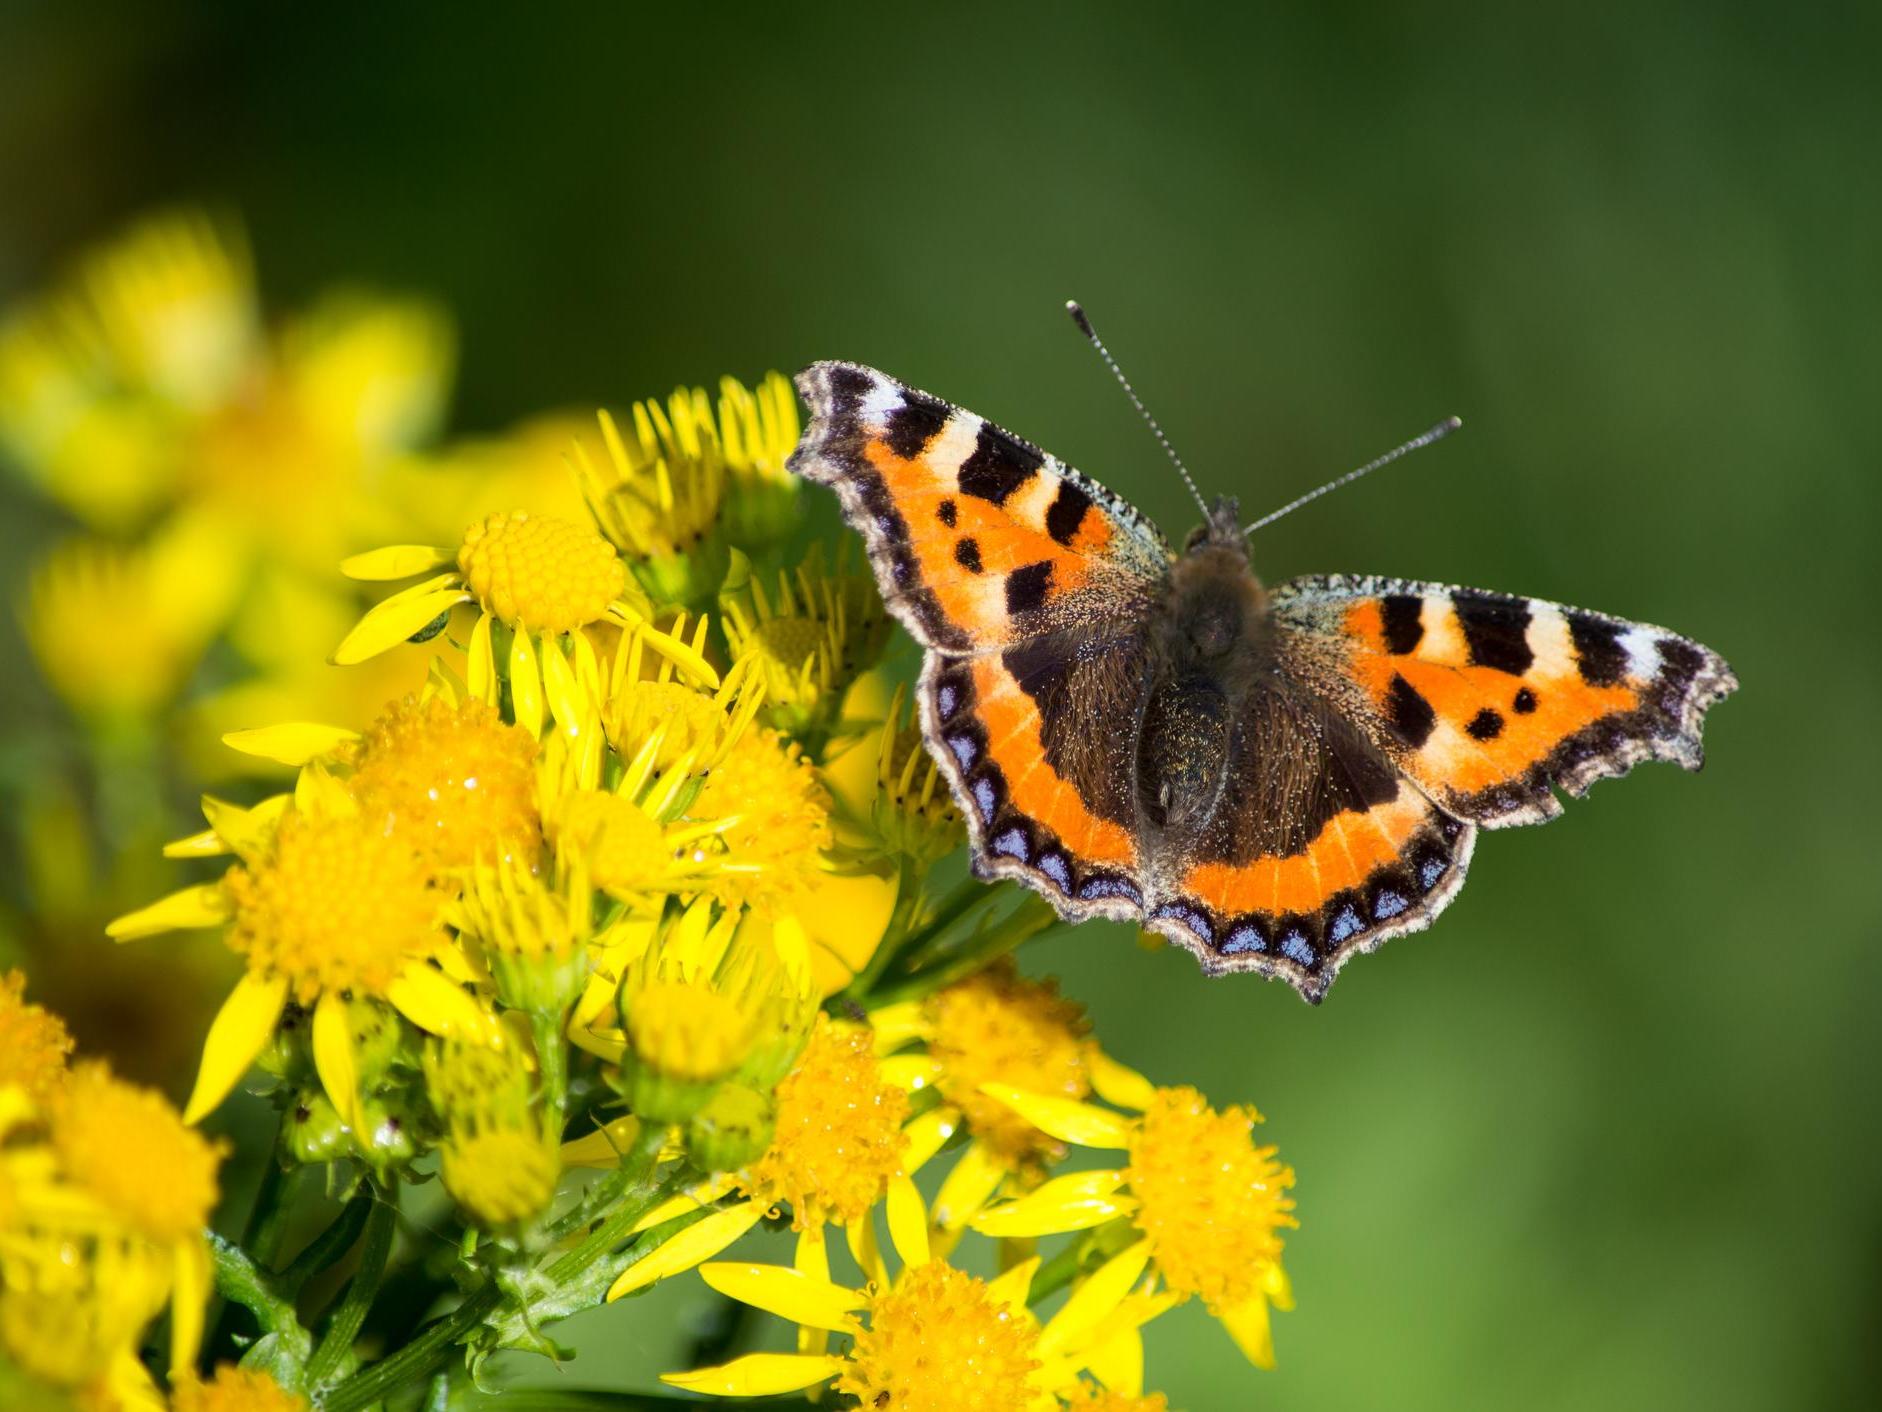 Butterflies and moths are among insect species most at risk of extinction, scientists have warned